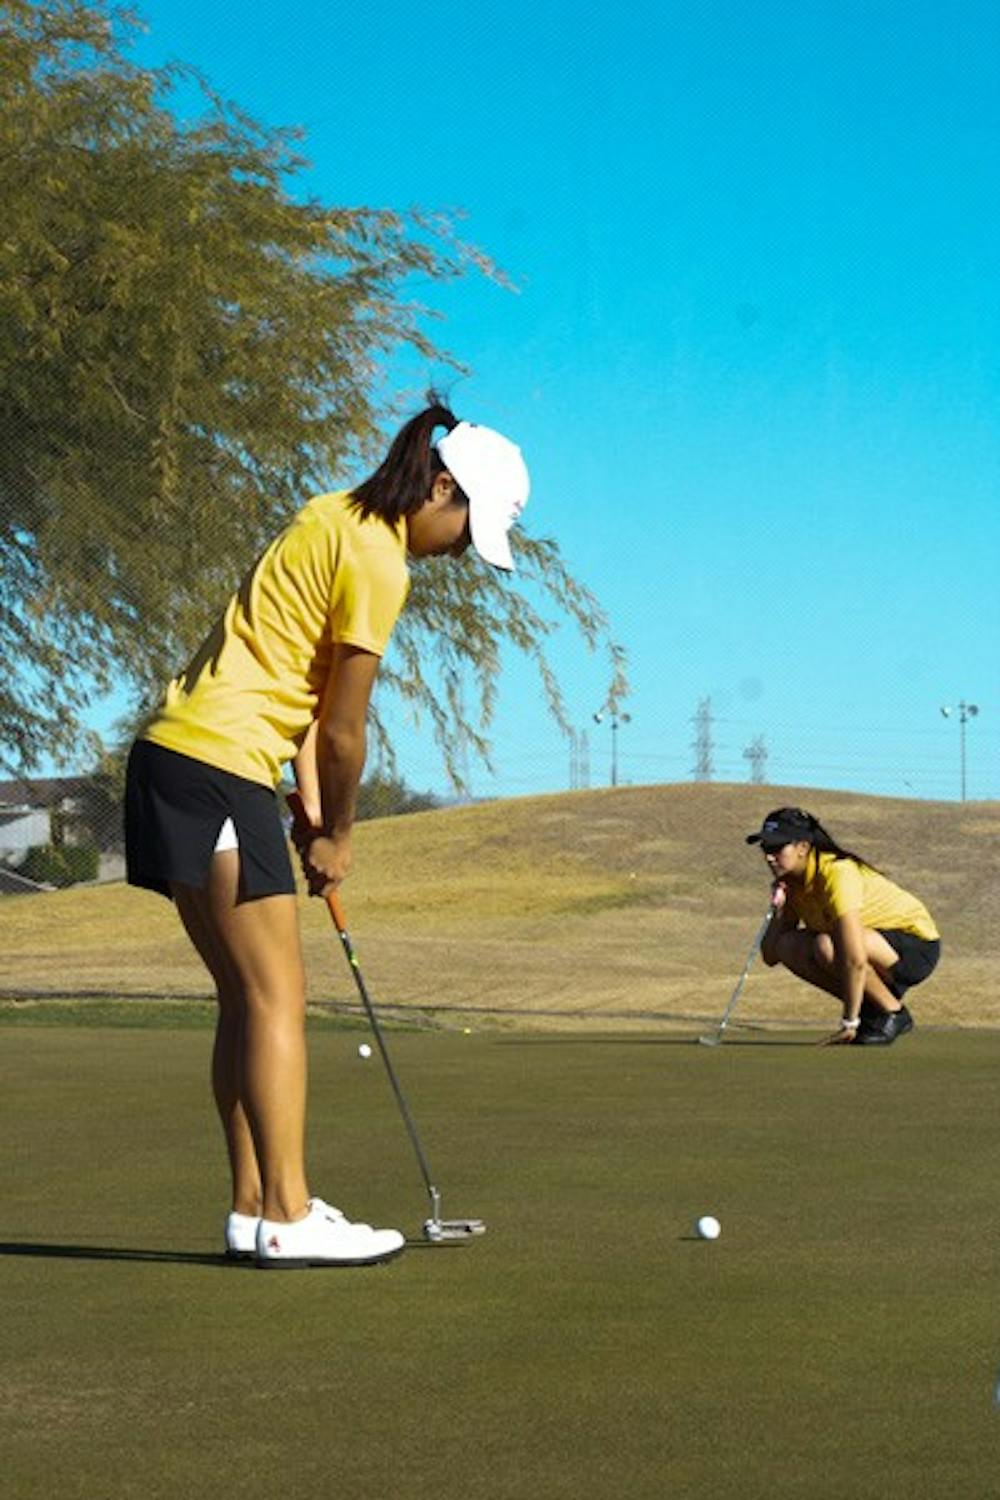 LINING UP: Freshman Justine Lee takes time to perfect her putting before teeing off at ASU Karsten for a practice round. (Photo by Lisa Bartoli)